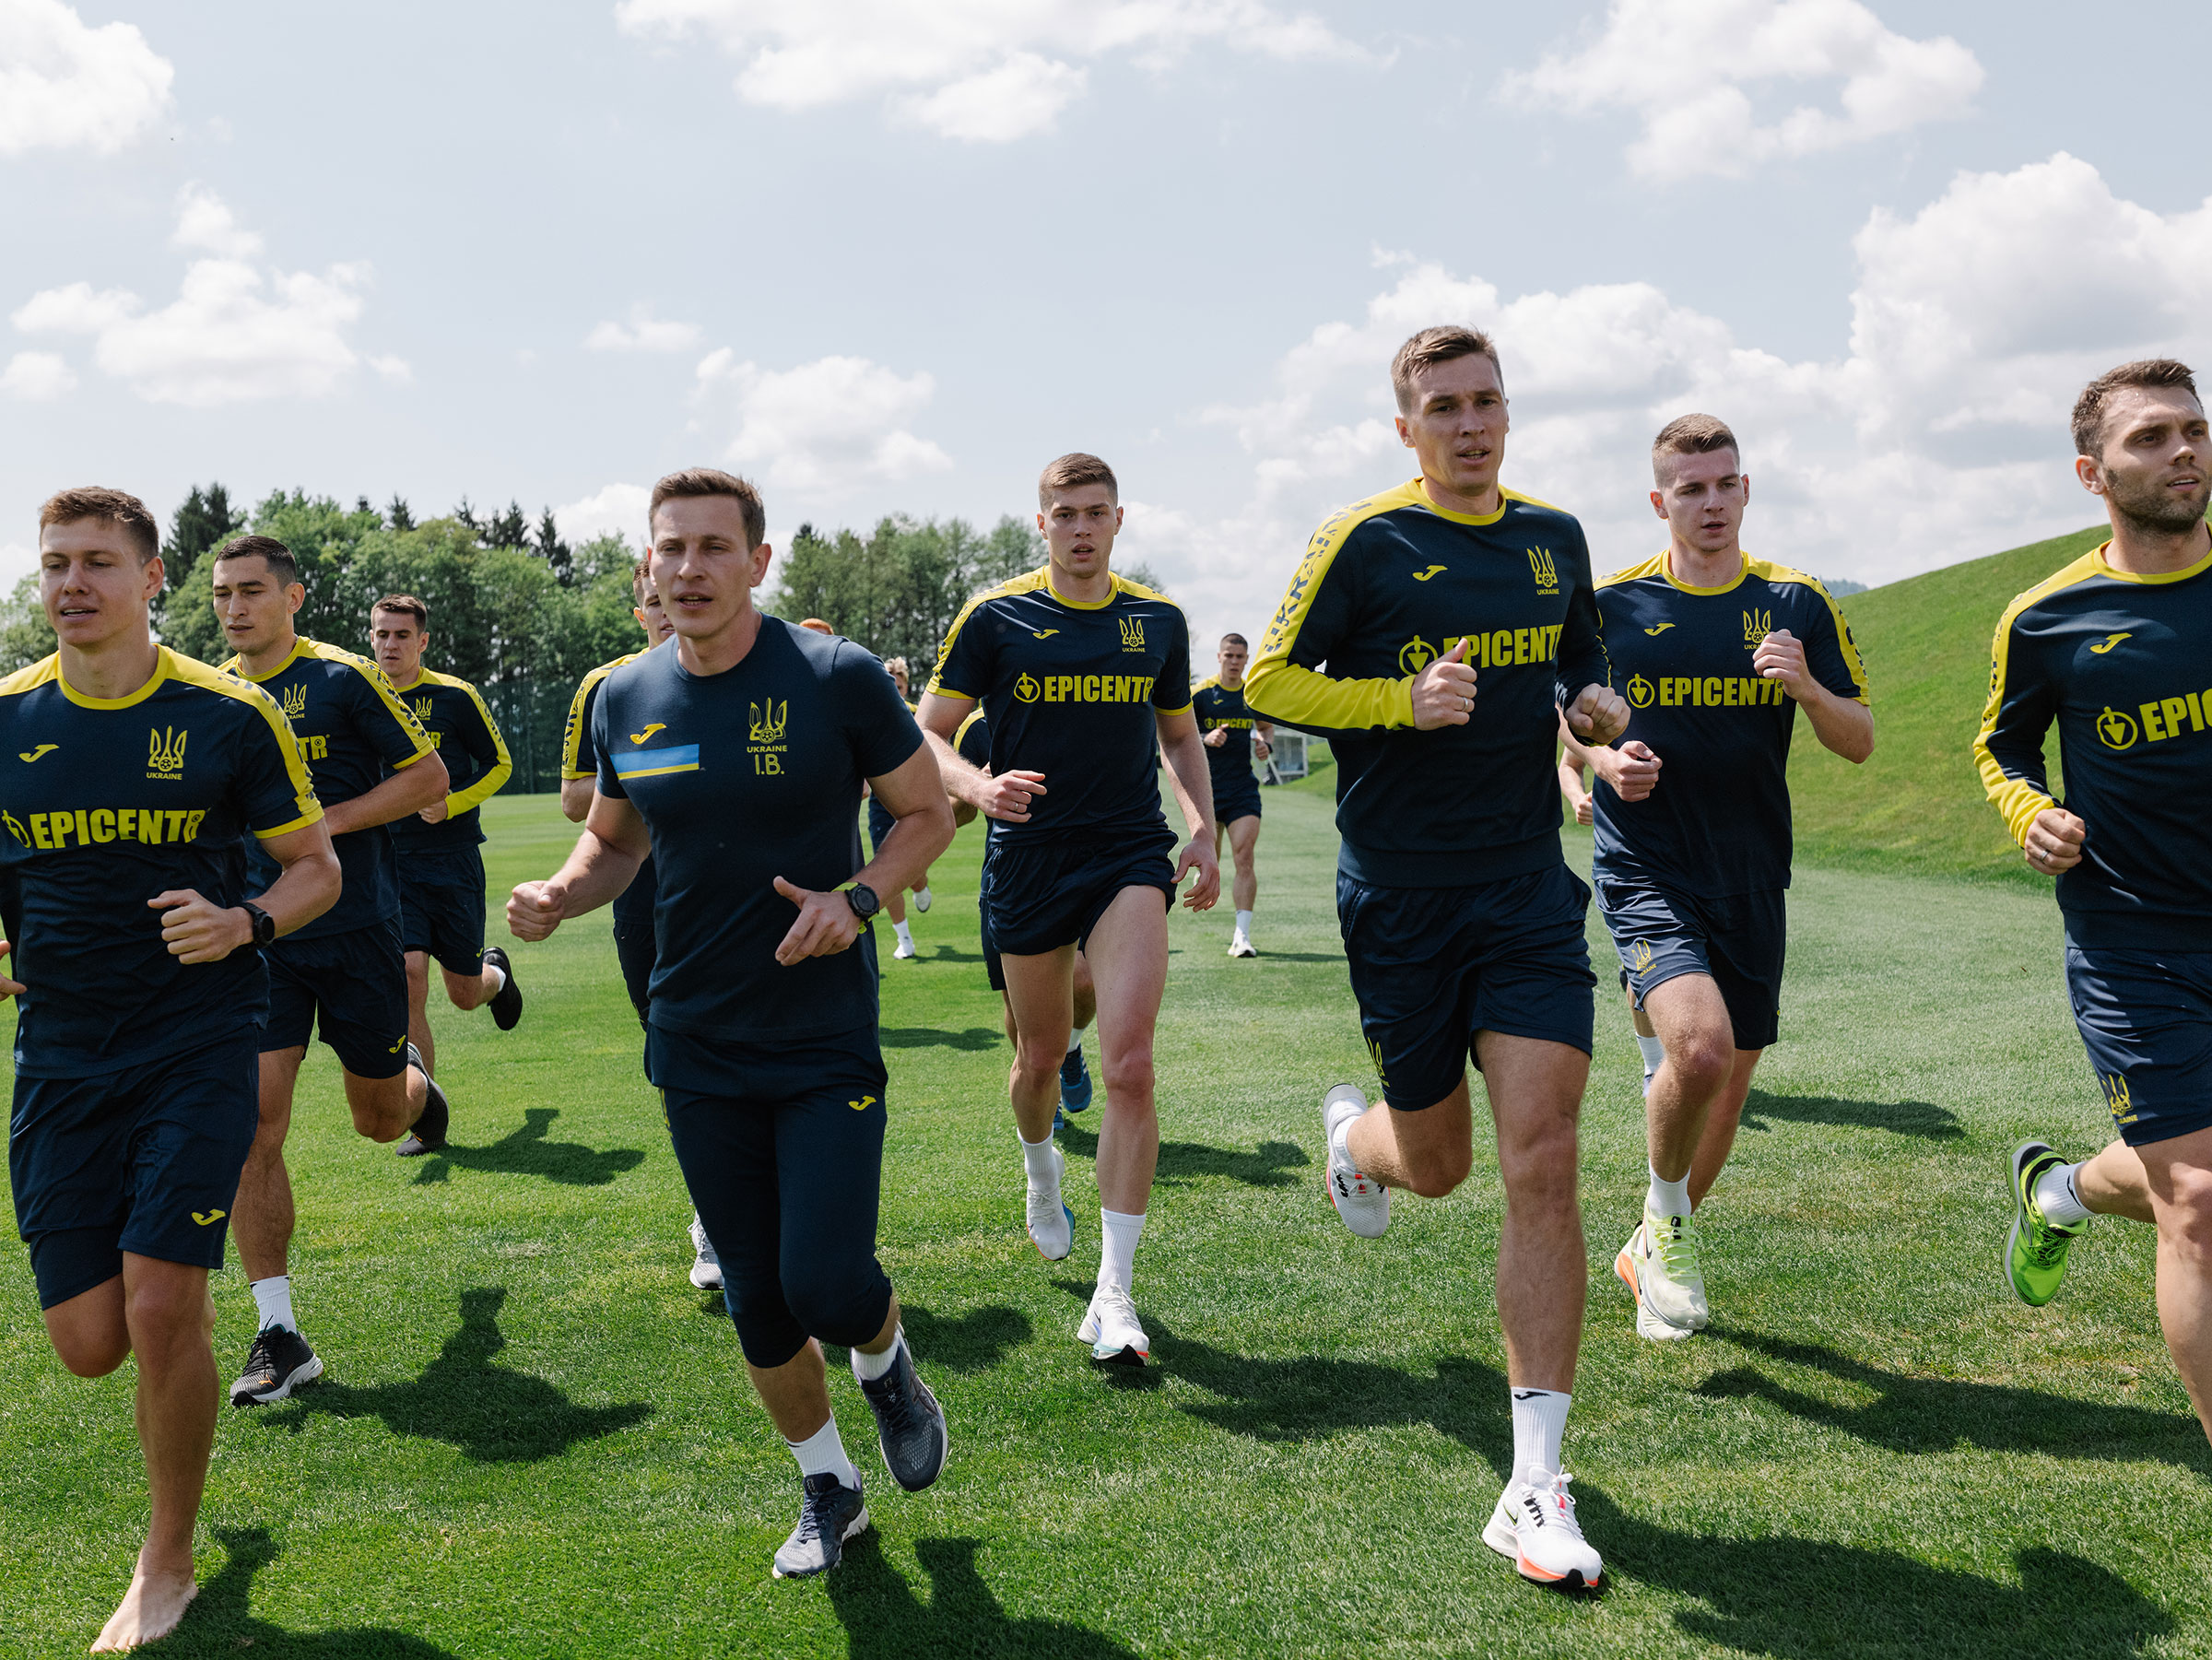 Ukraine’s men’s national soccer team trains with their fitness coach Ivan Bashtovyi, at the National Football Center Brdo in Slovenia on May 14, 2022. (Ciril Jazbec for TIME)